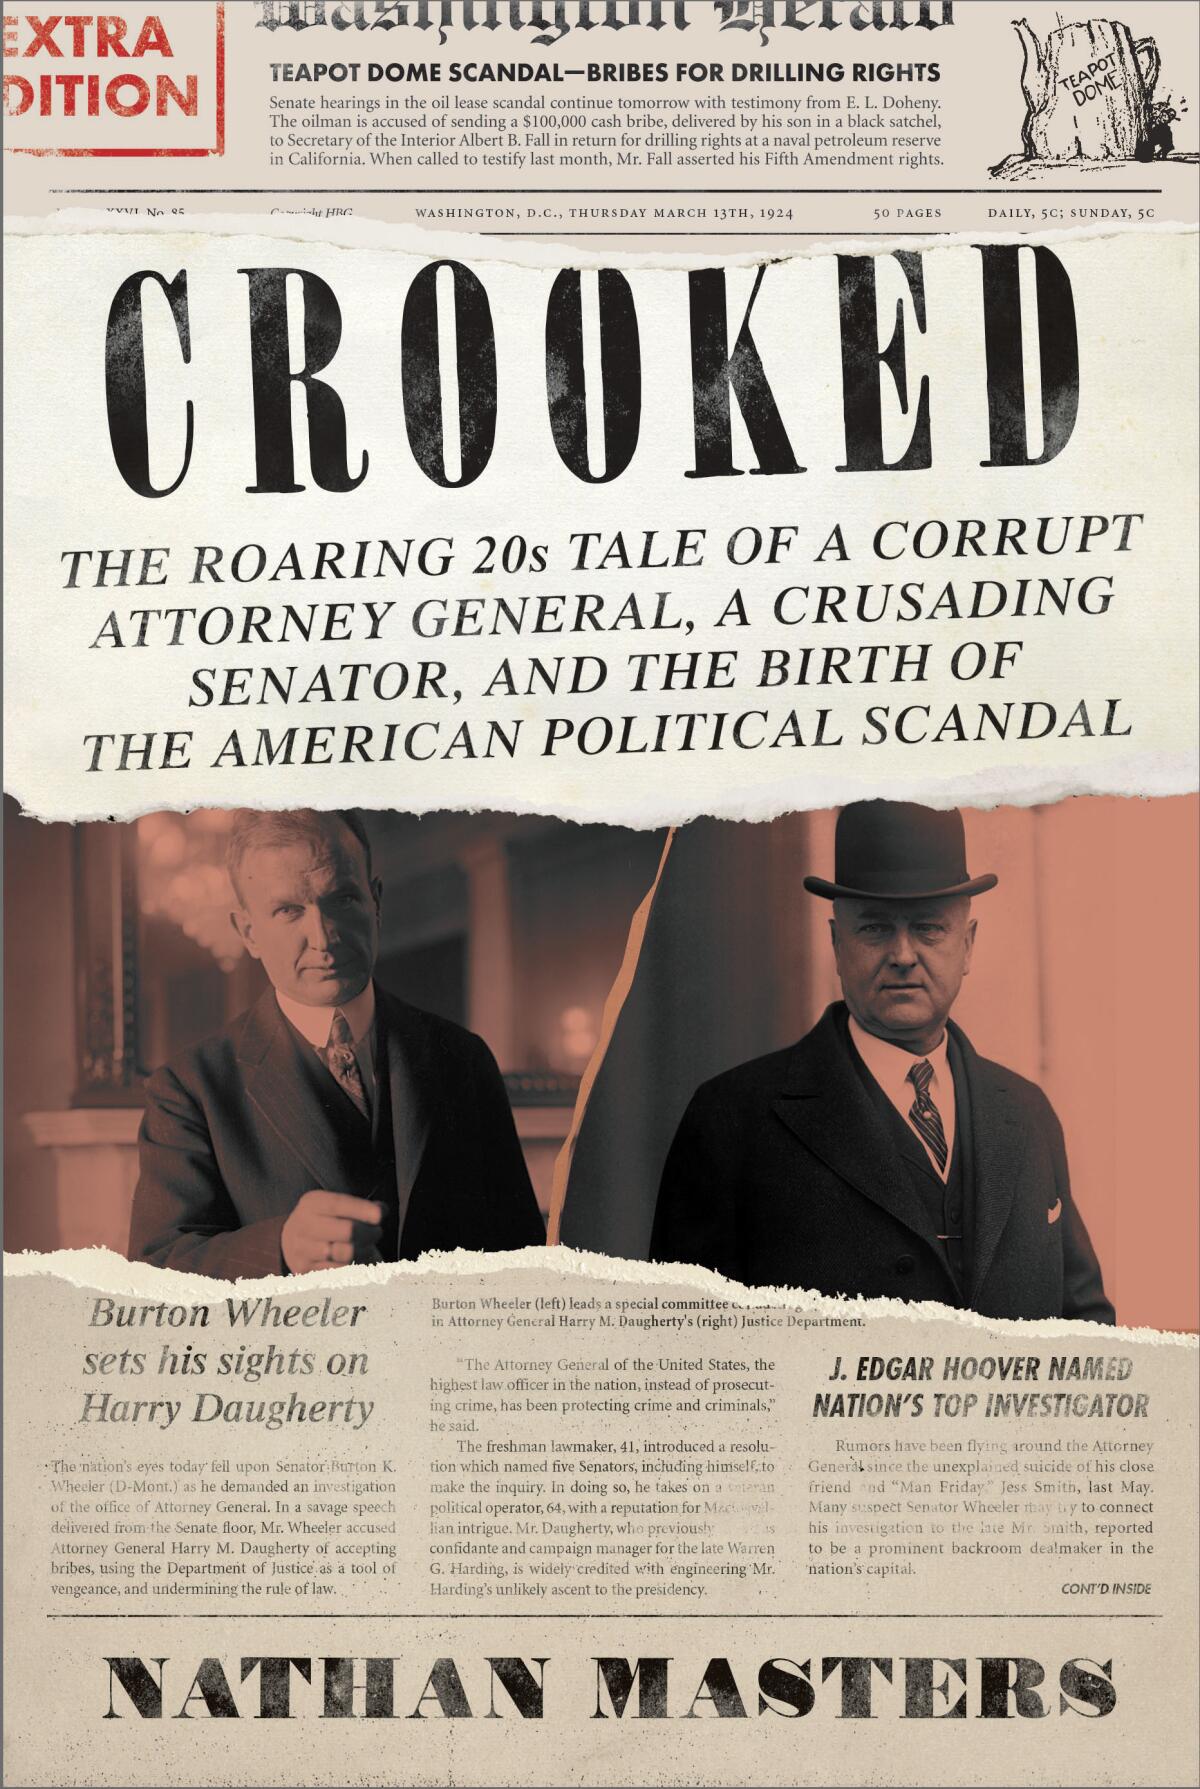 The book cover of "Crooked" by Nathan Masters